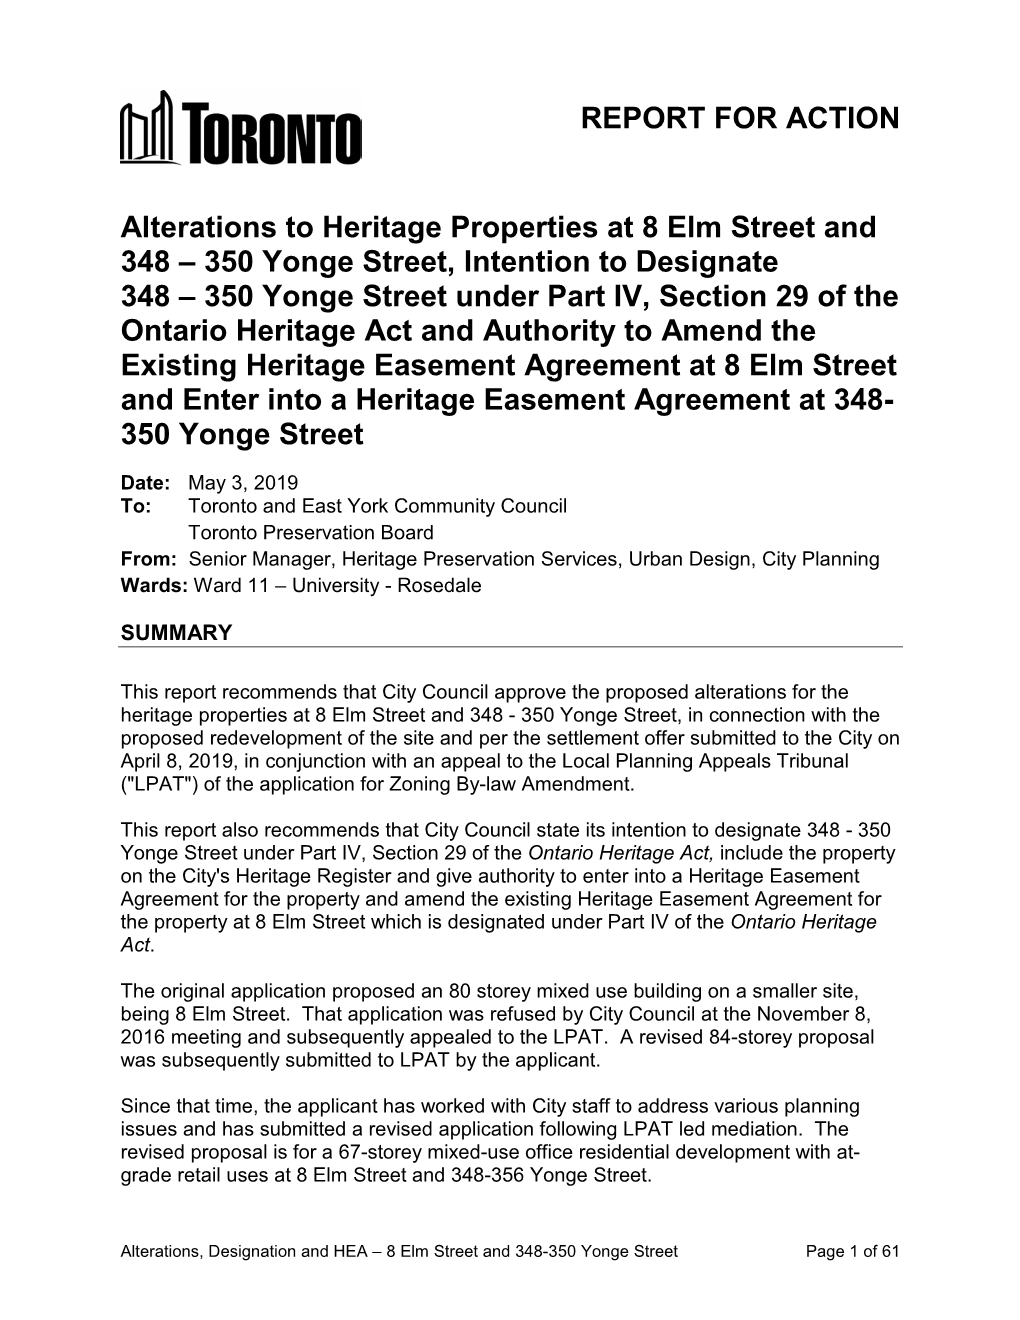 Alterations to Heritage Properties at 8 Elm Street And